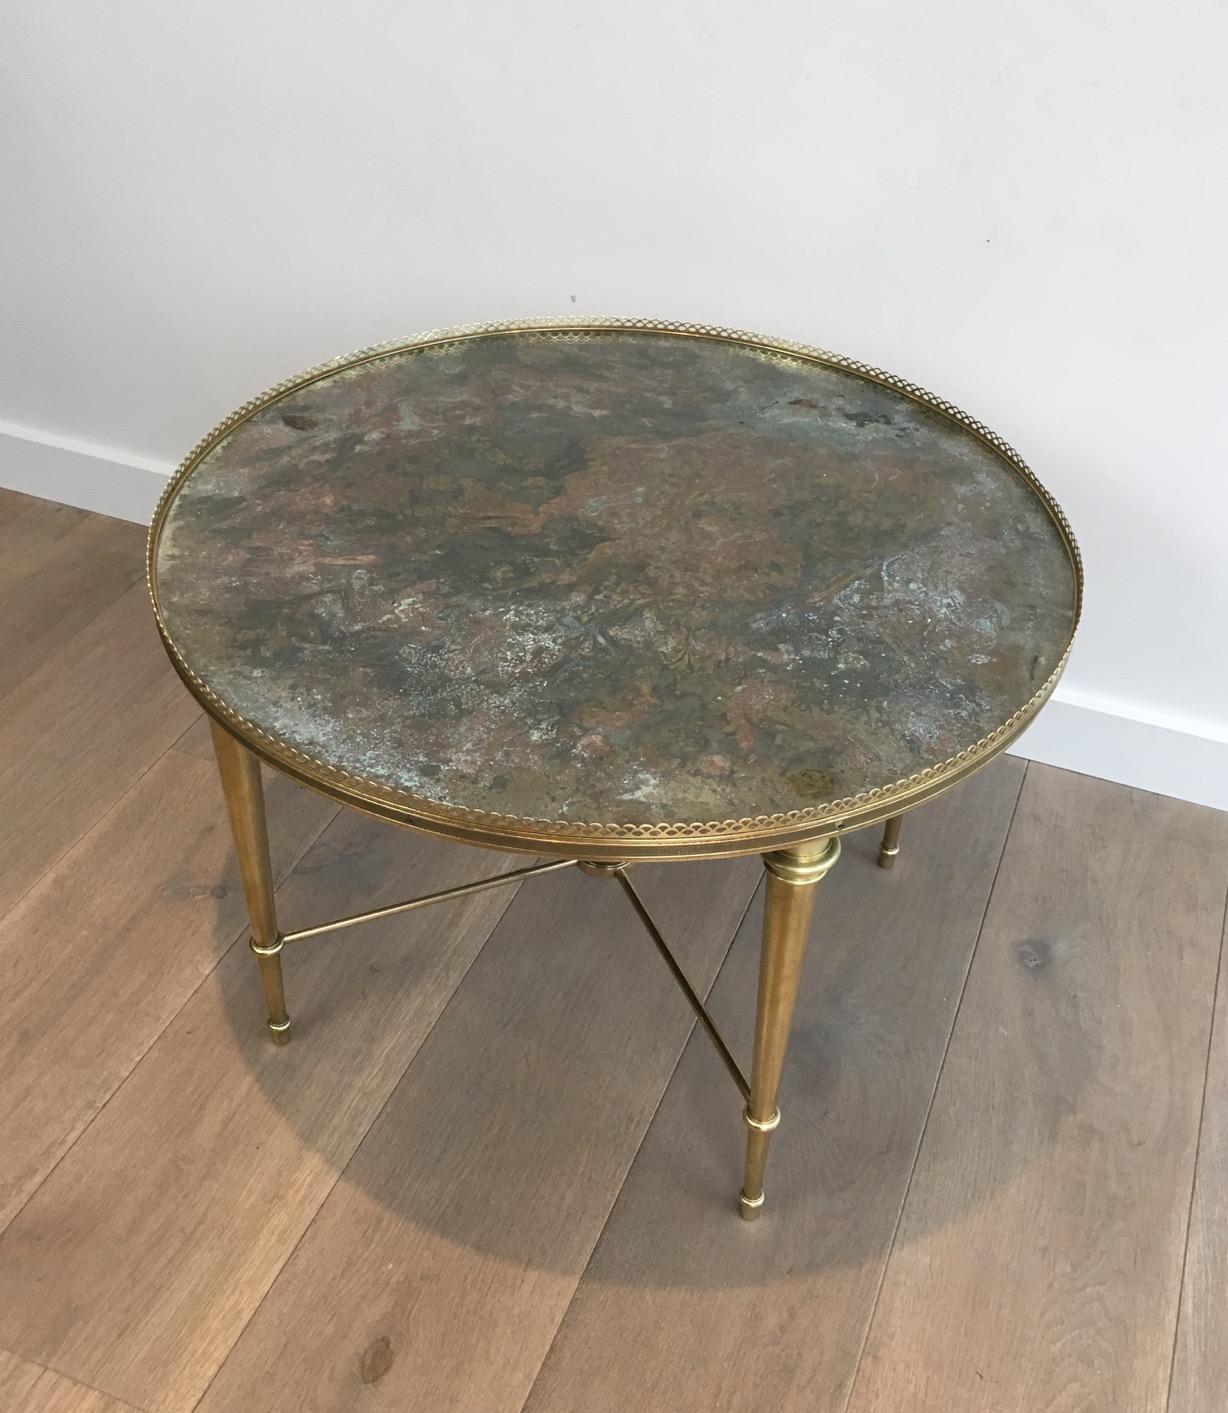 Verre Églomisé Maison Ramsay, Neoclassical Round Brass Coffee Table with Eglomized Glass Top